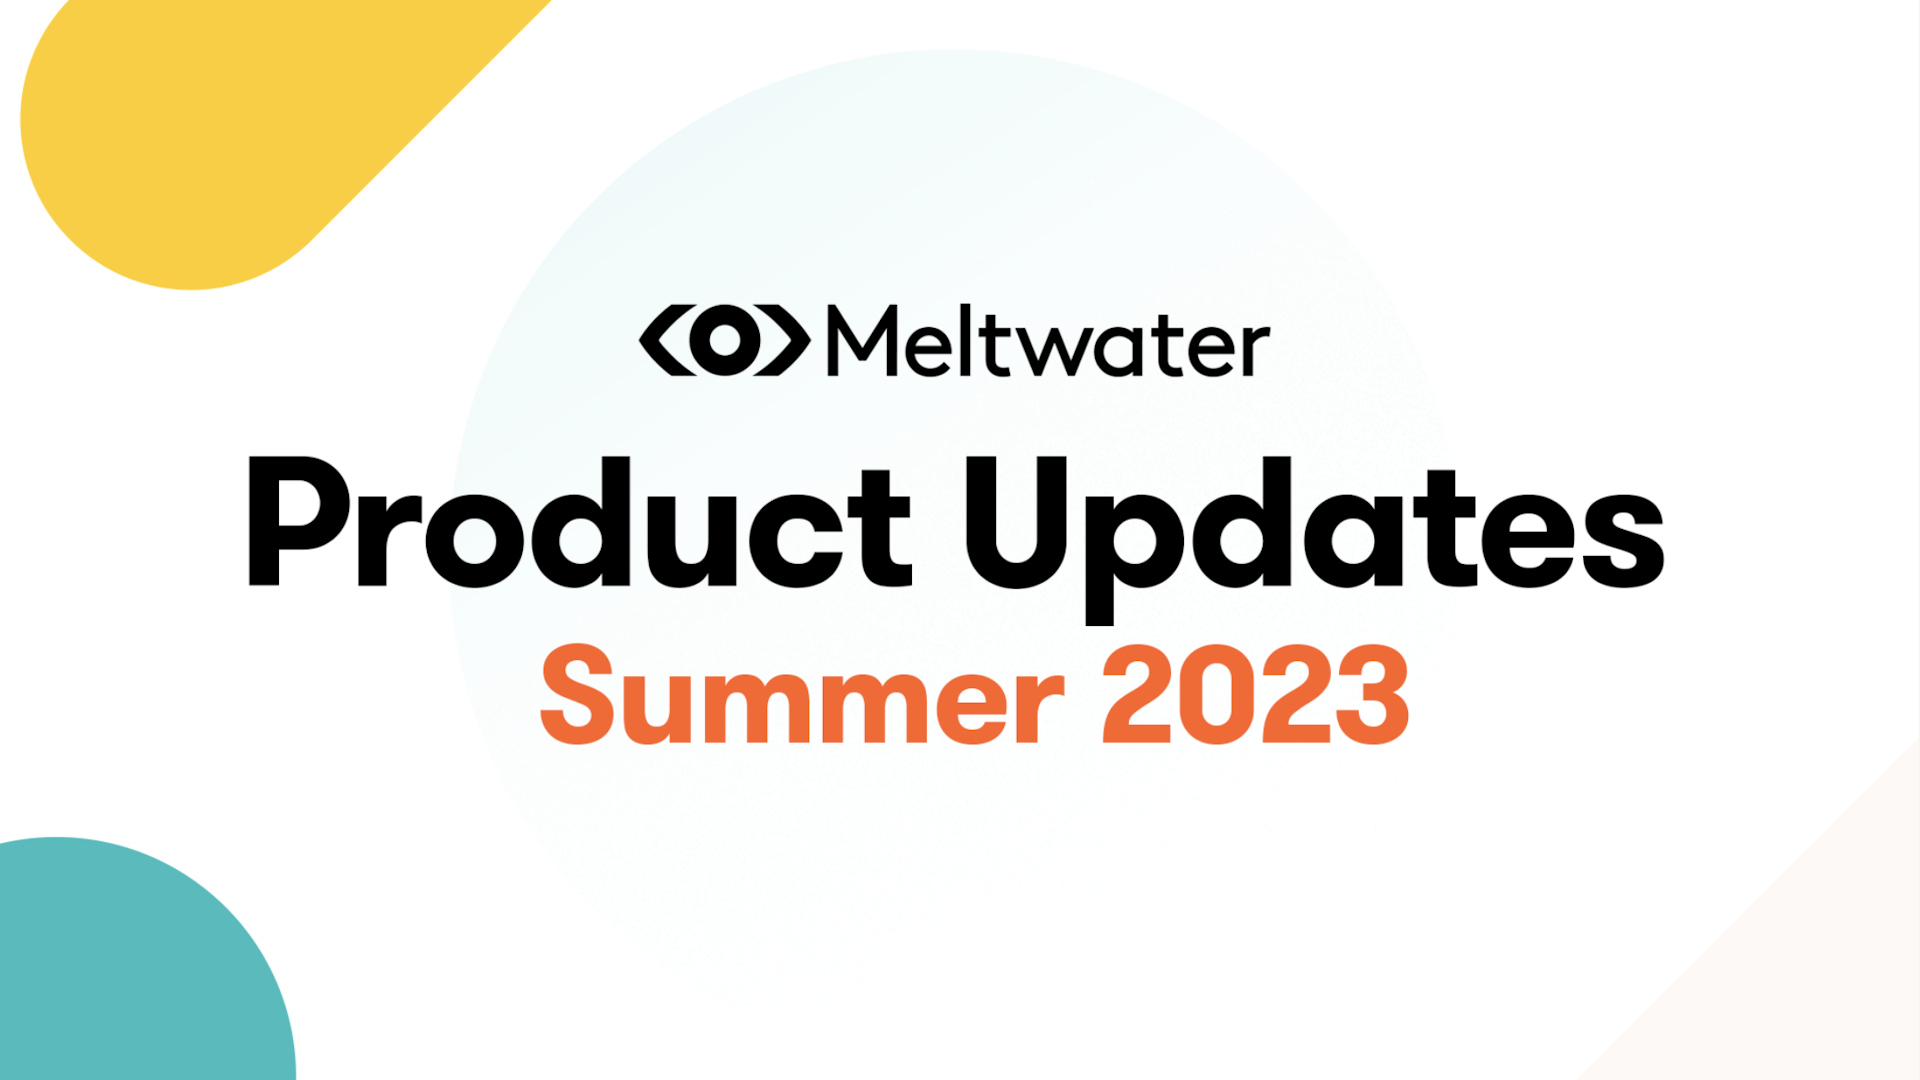 Meltwater Product Updates Summer 2023 Banner